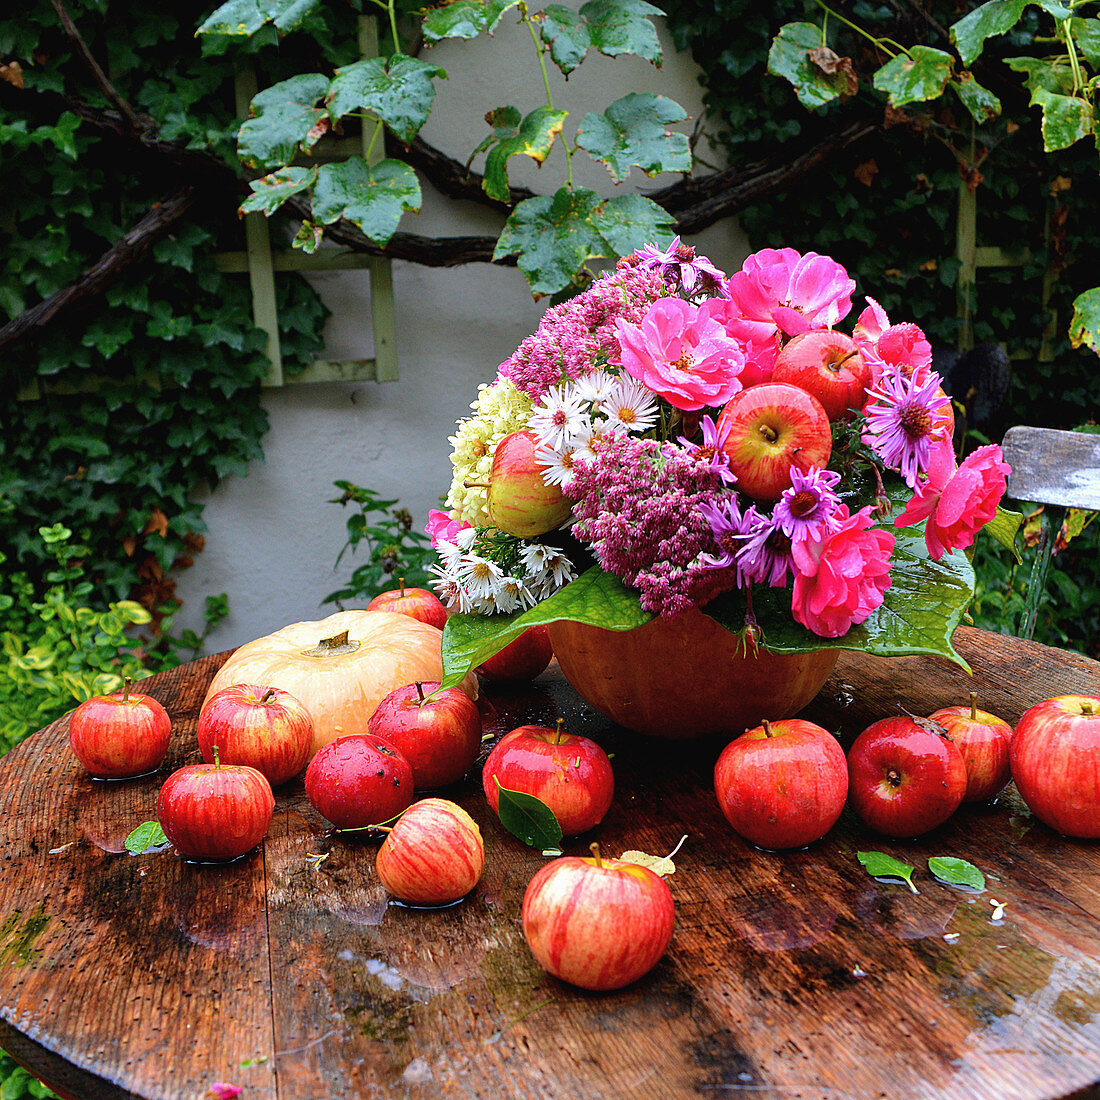 Autumn bouquet with apples and rose petals